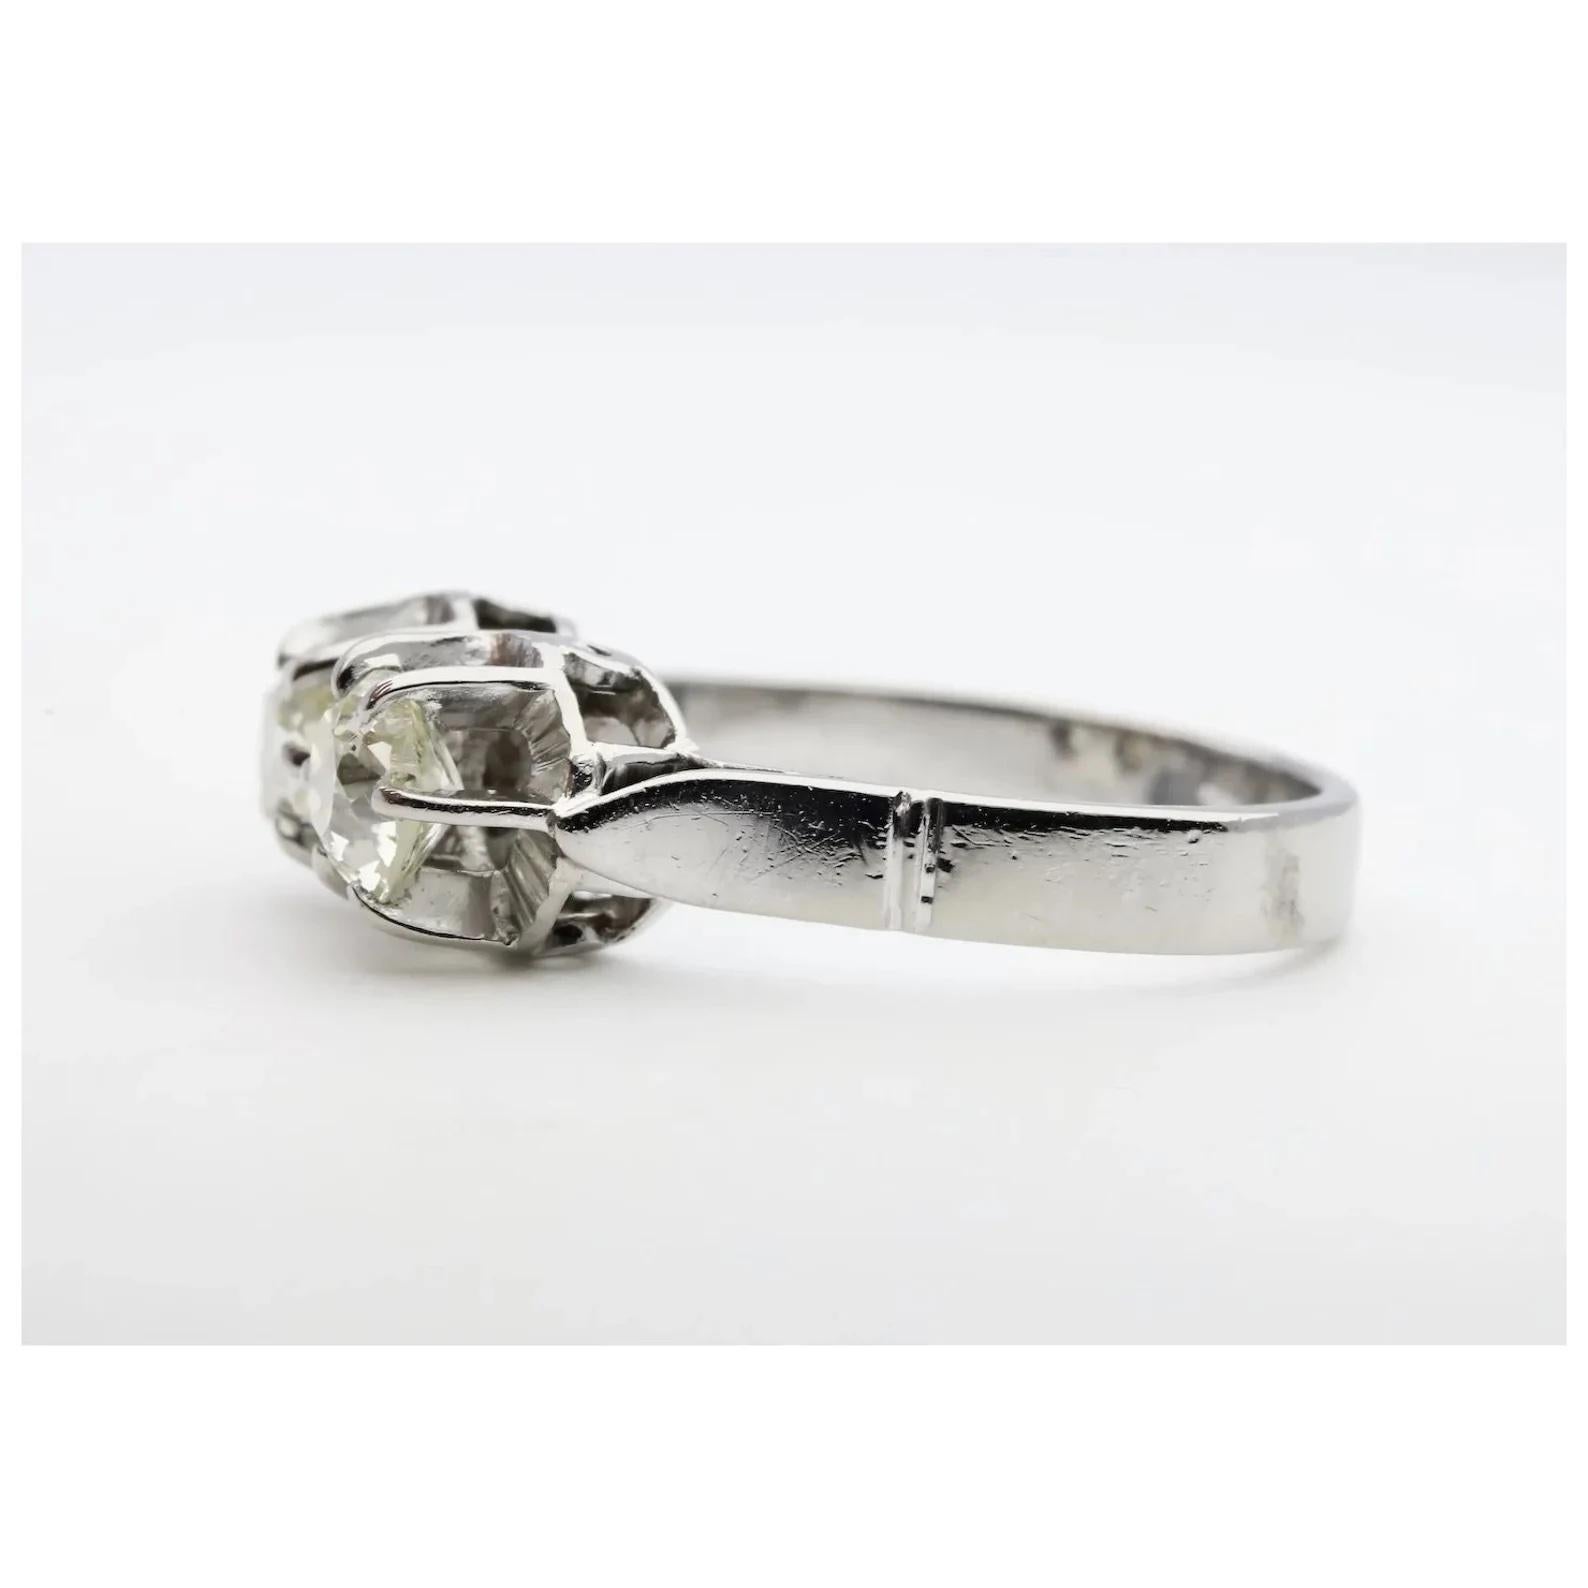 An original Art Deco period Toi et Moi diamond ring in 18 karat white gold. This ring features two sparkling antique old mine cut cushion shaped diamonds set in hand crafted buttercup style six prong mountings. The larger diamond weighs 0.65 carats,